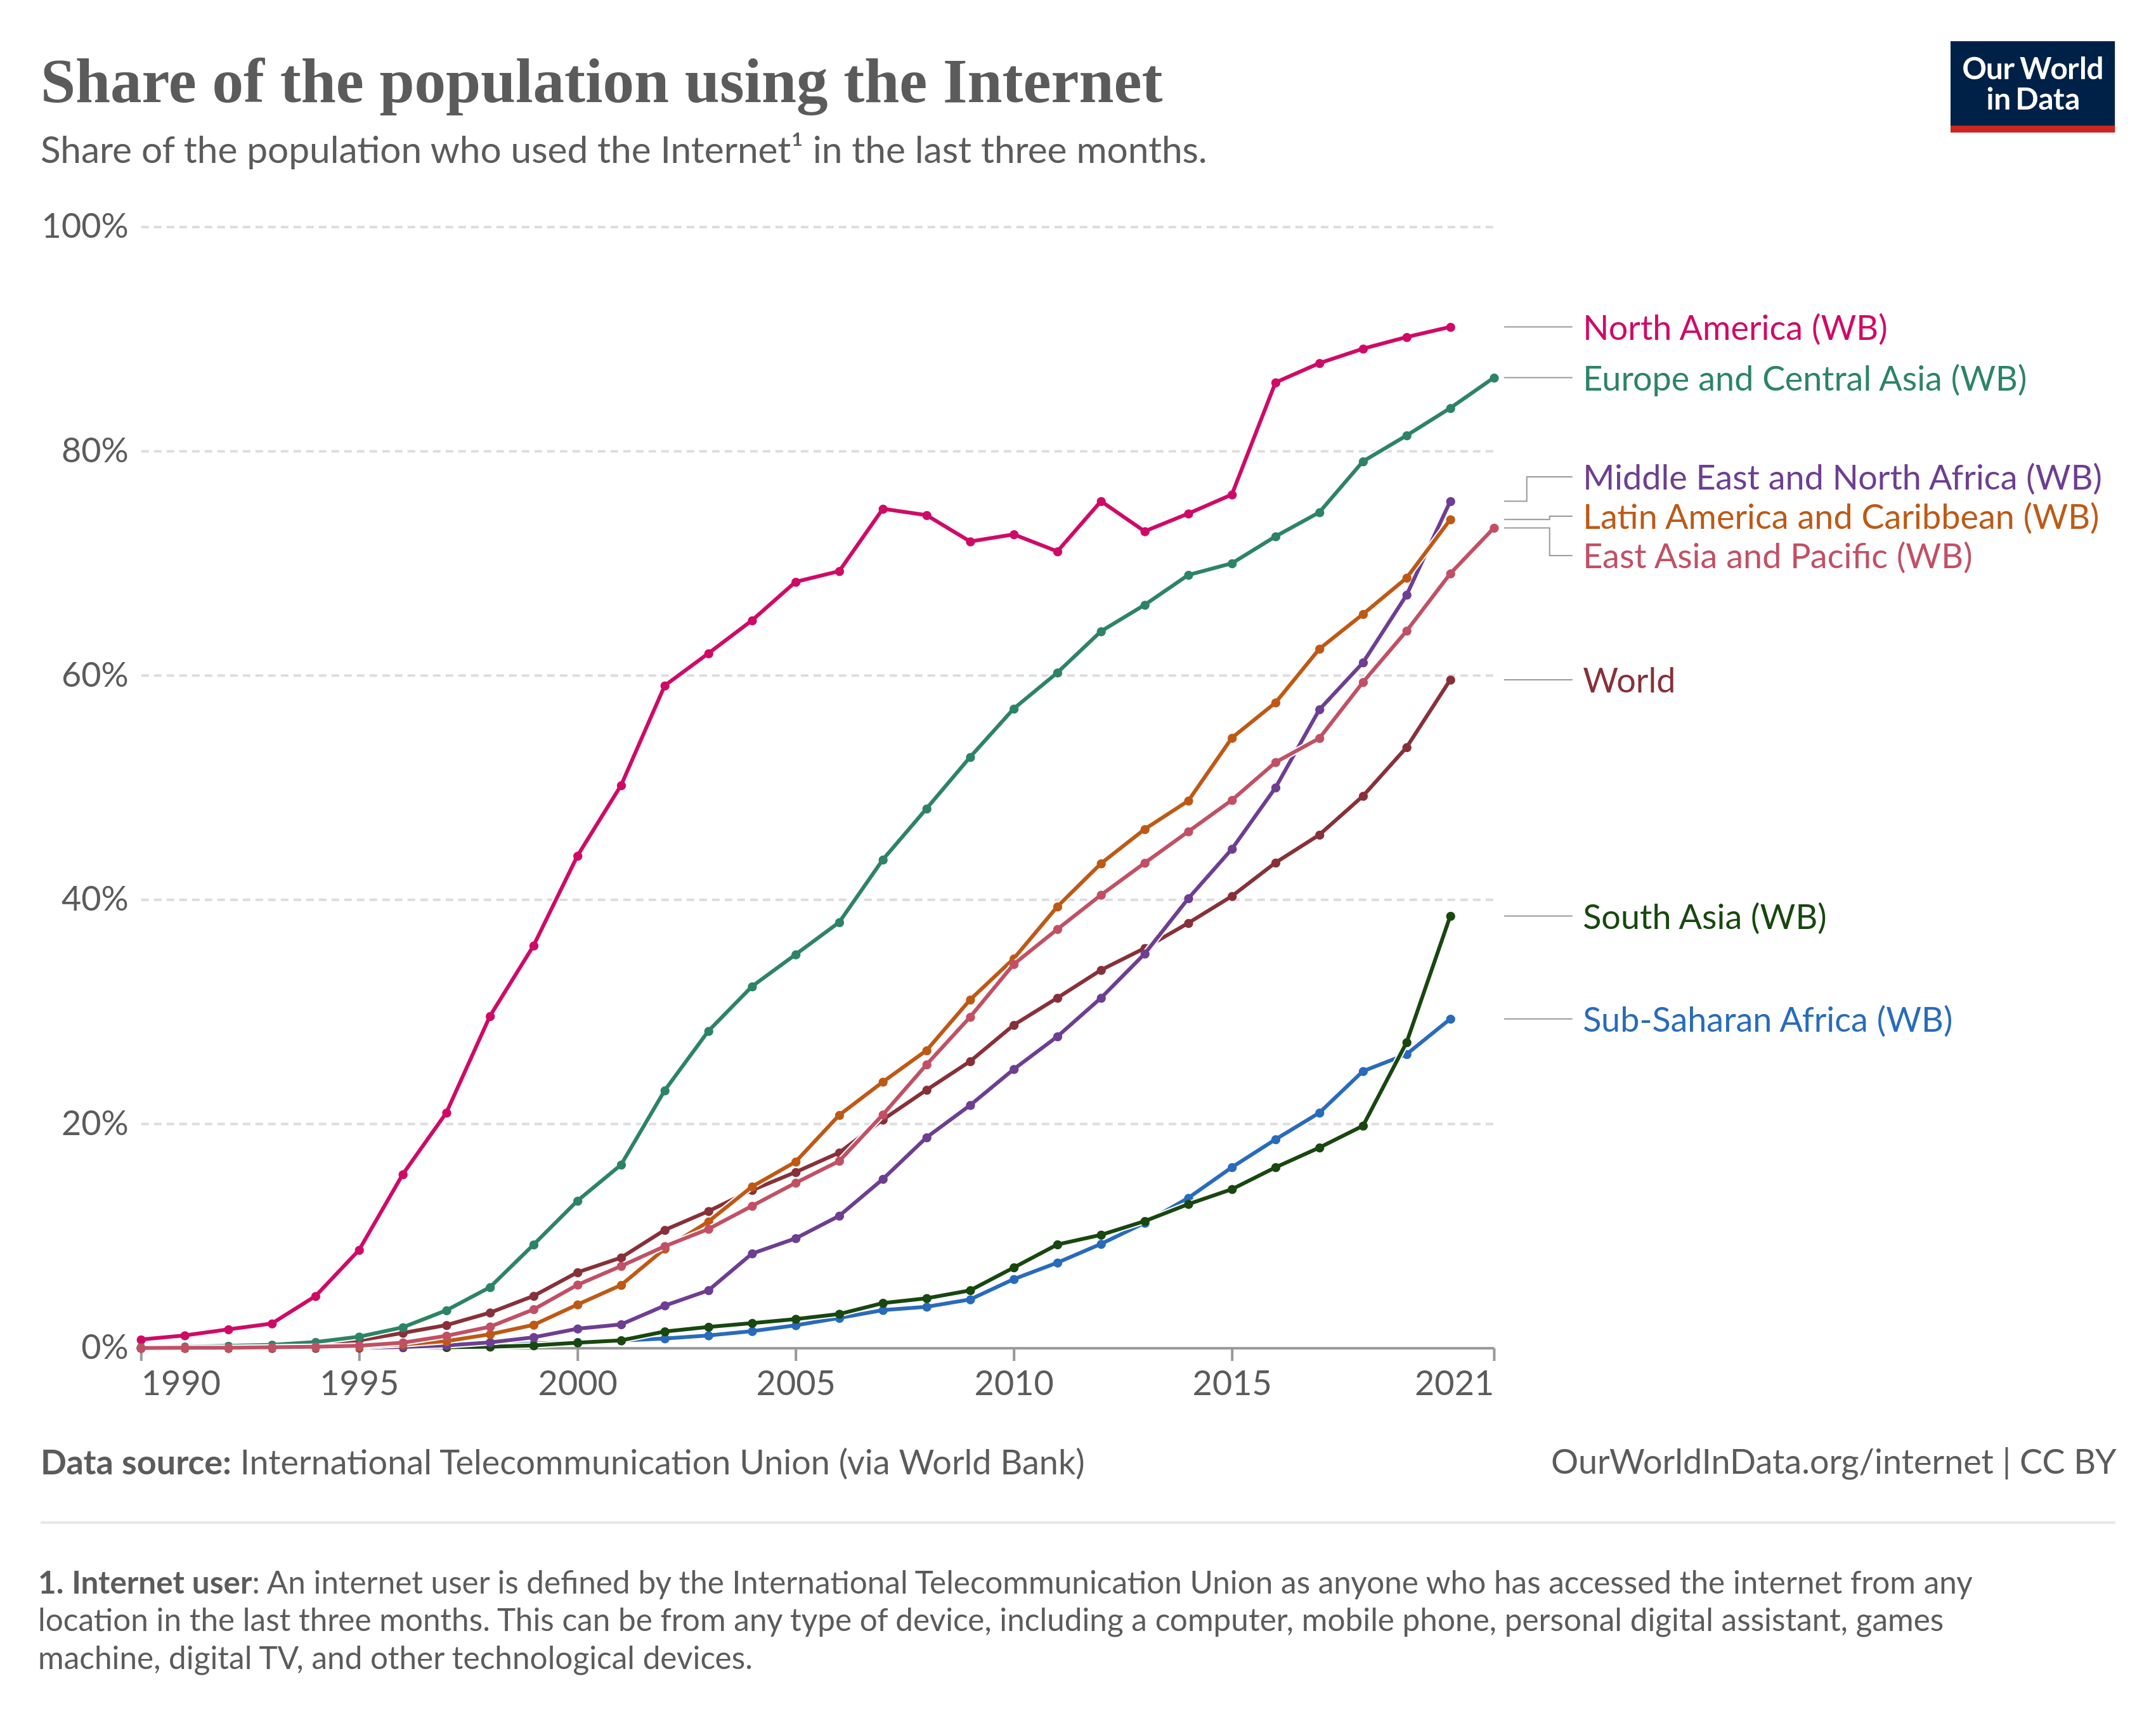 a line graph showing the percentage of the population that use the internet globally, seperated by region